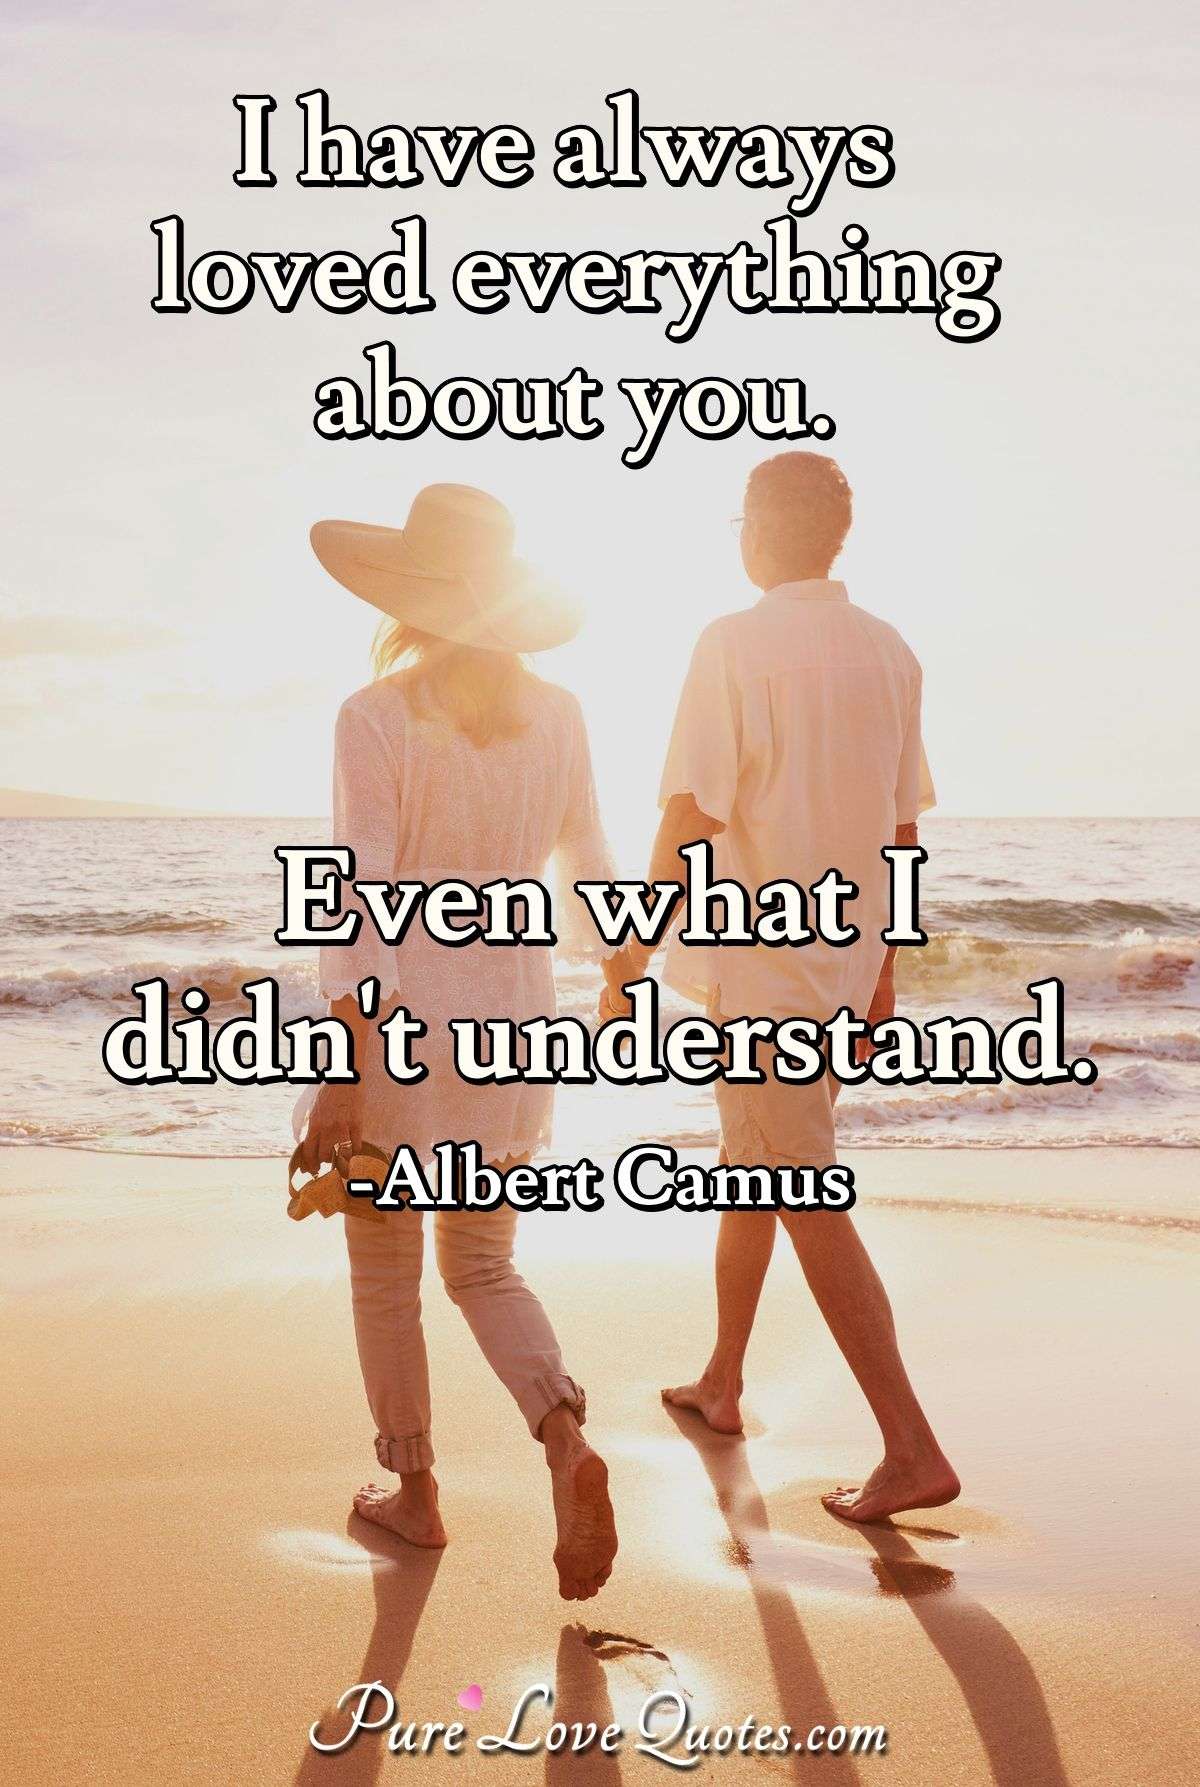 Romantic Love Quotes for Him to Express Your Feelings & Tell Him 'I ...